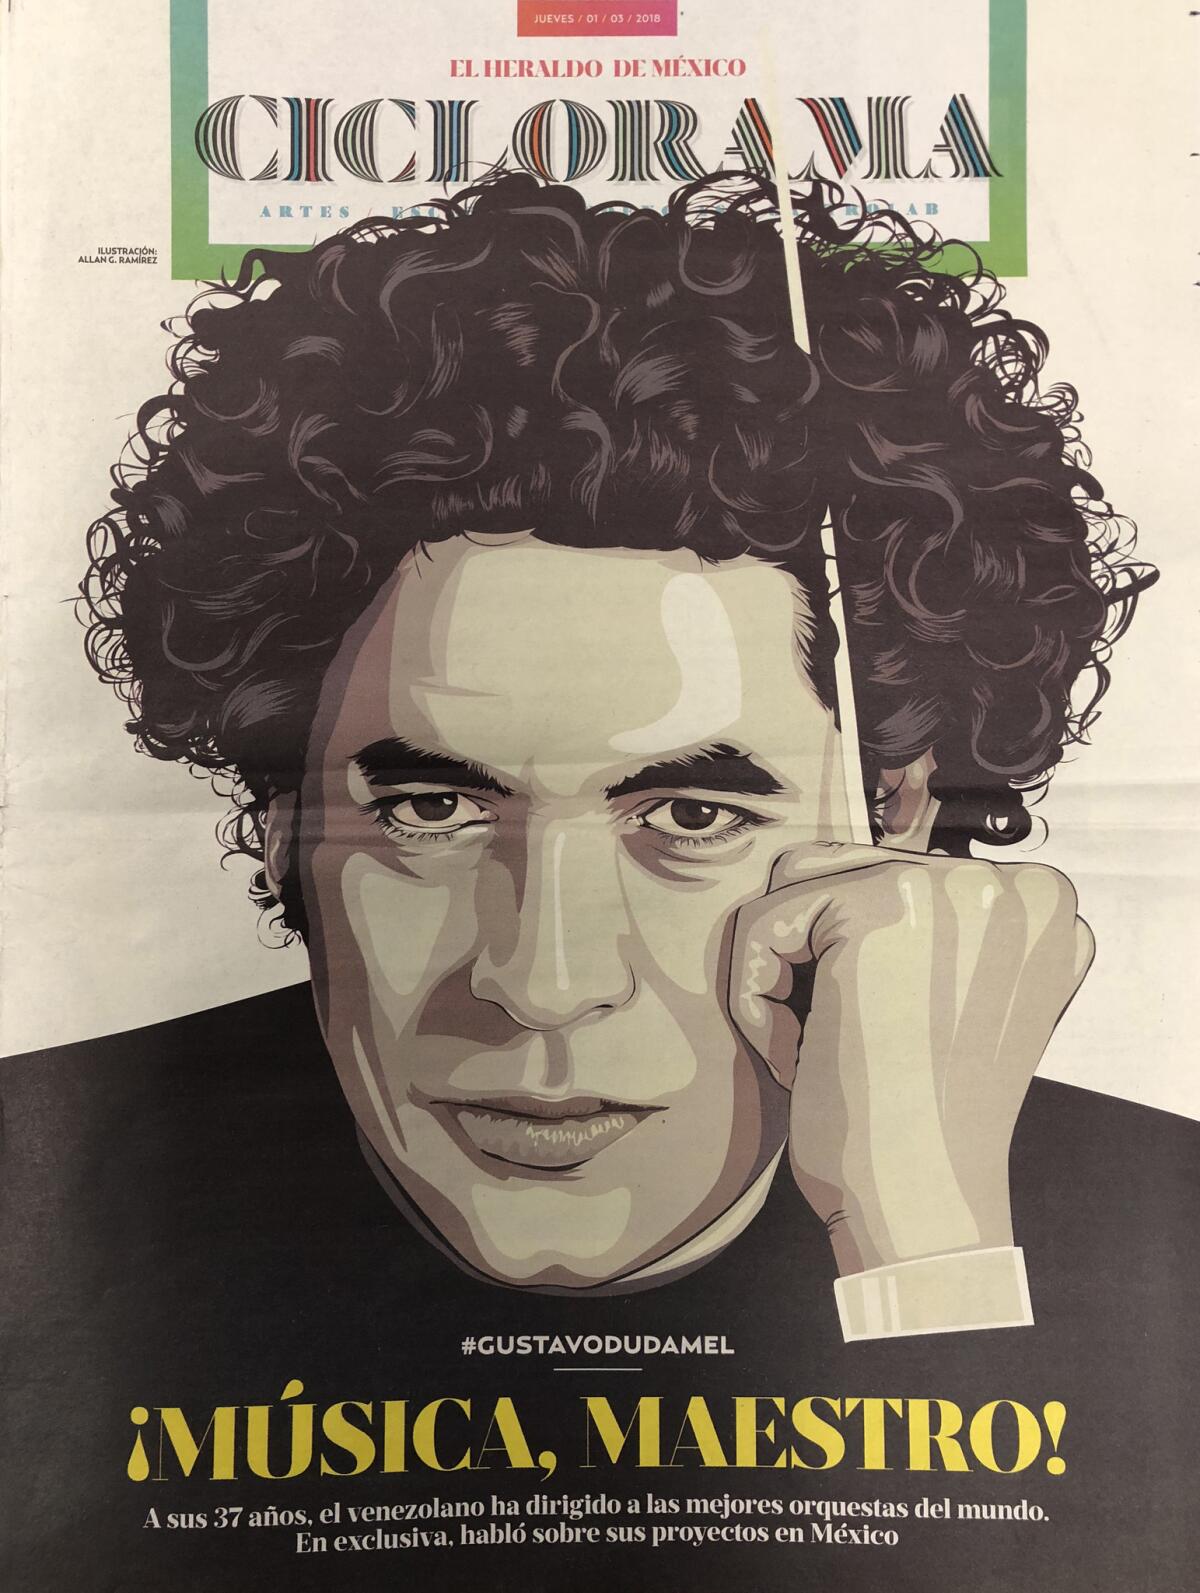 Artwork of Gustavo Dudamel in El Heraldo de Mexico, one of several Mexican newspaper spreads touting the presence of the conductor in the nation's capital.